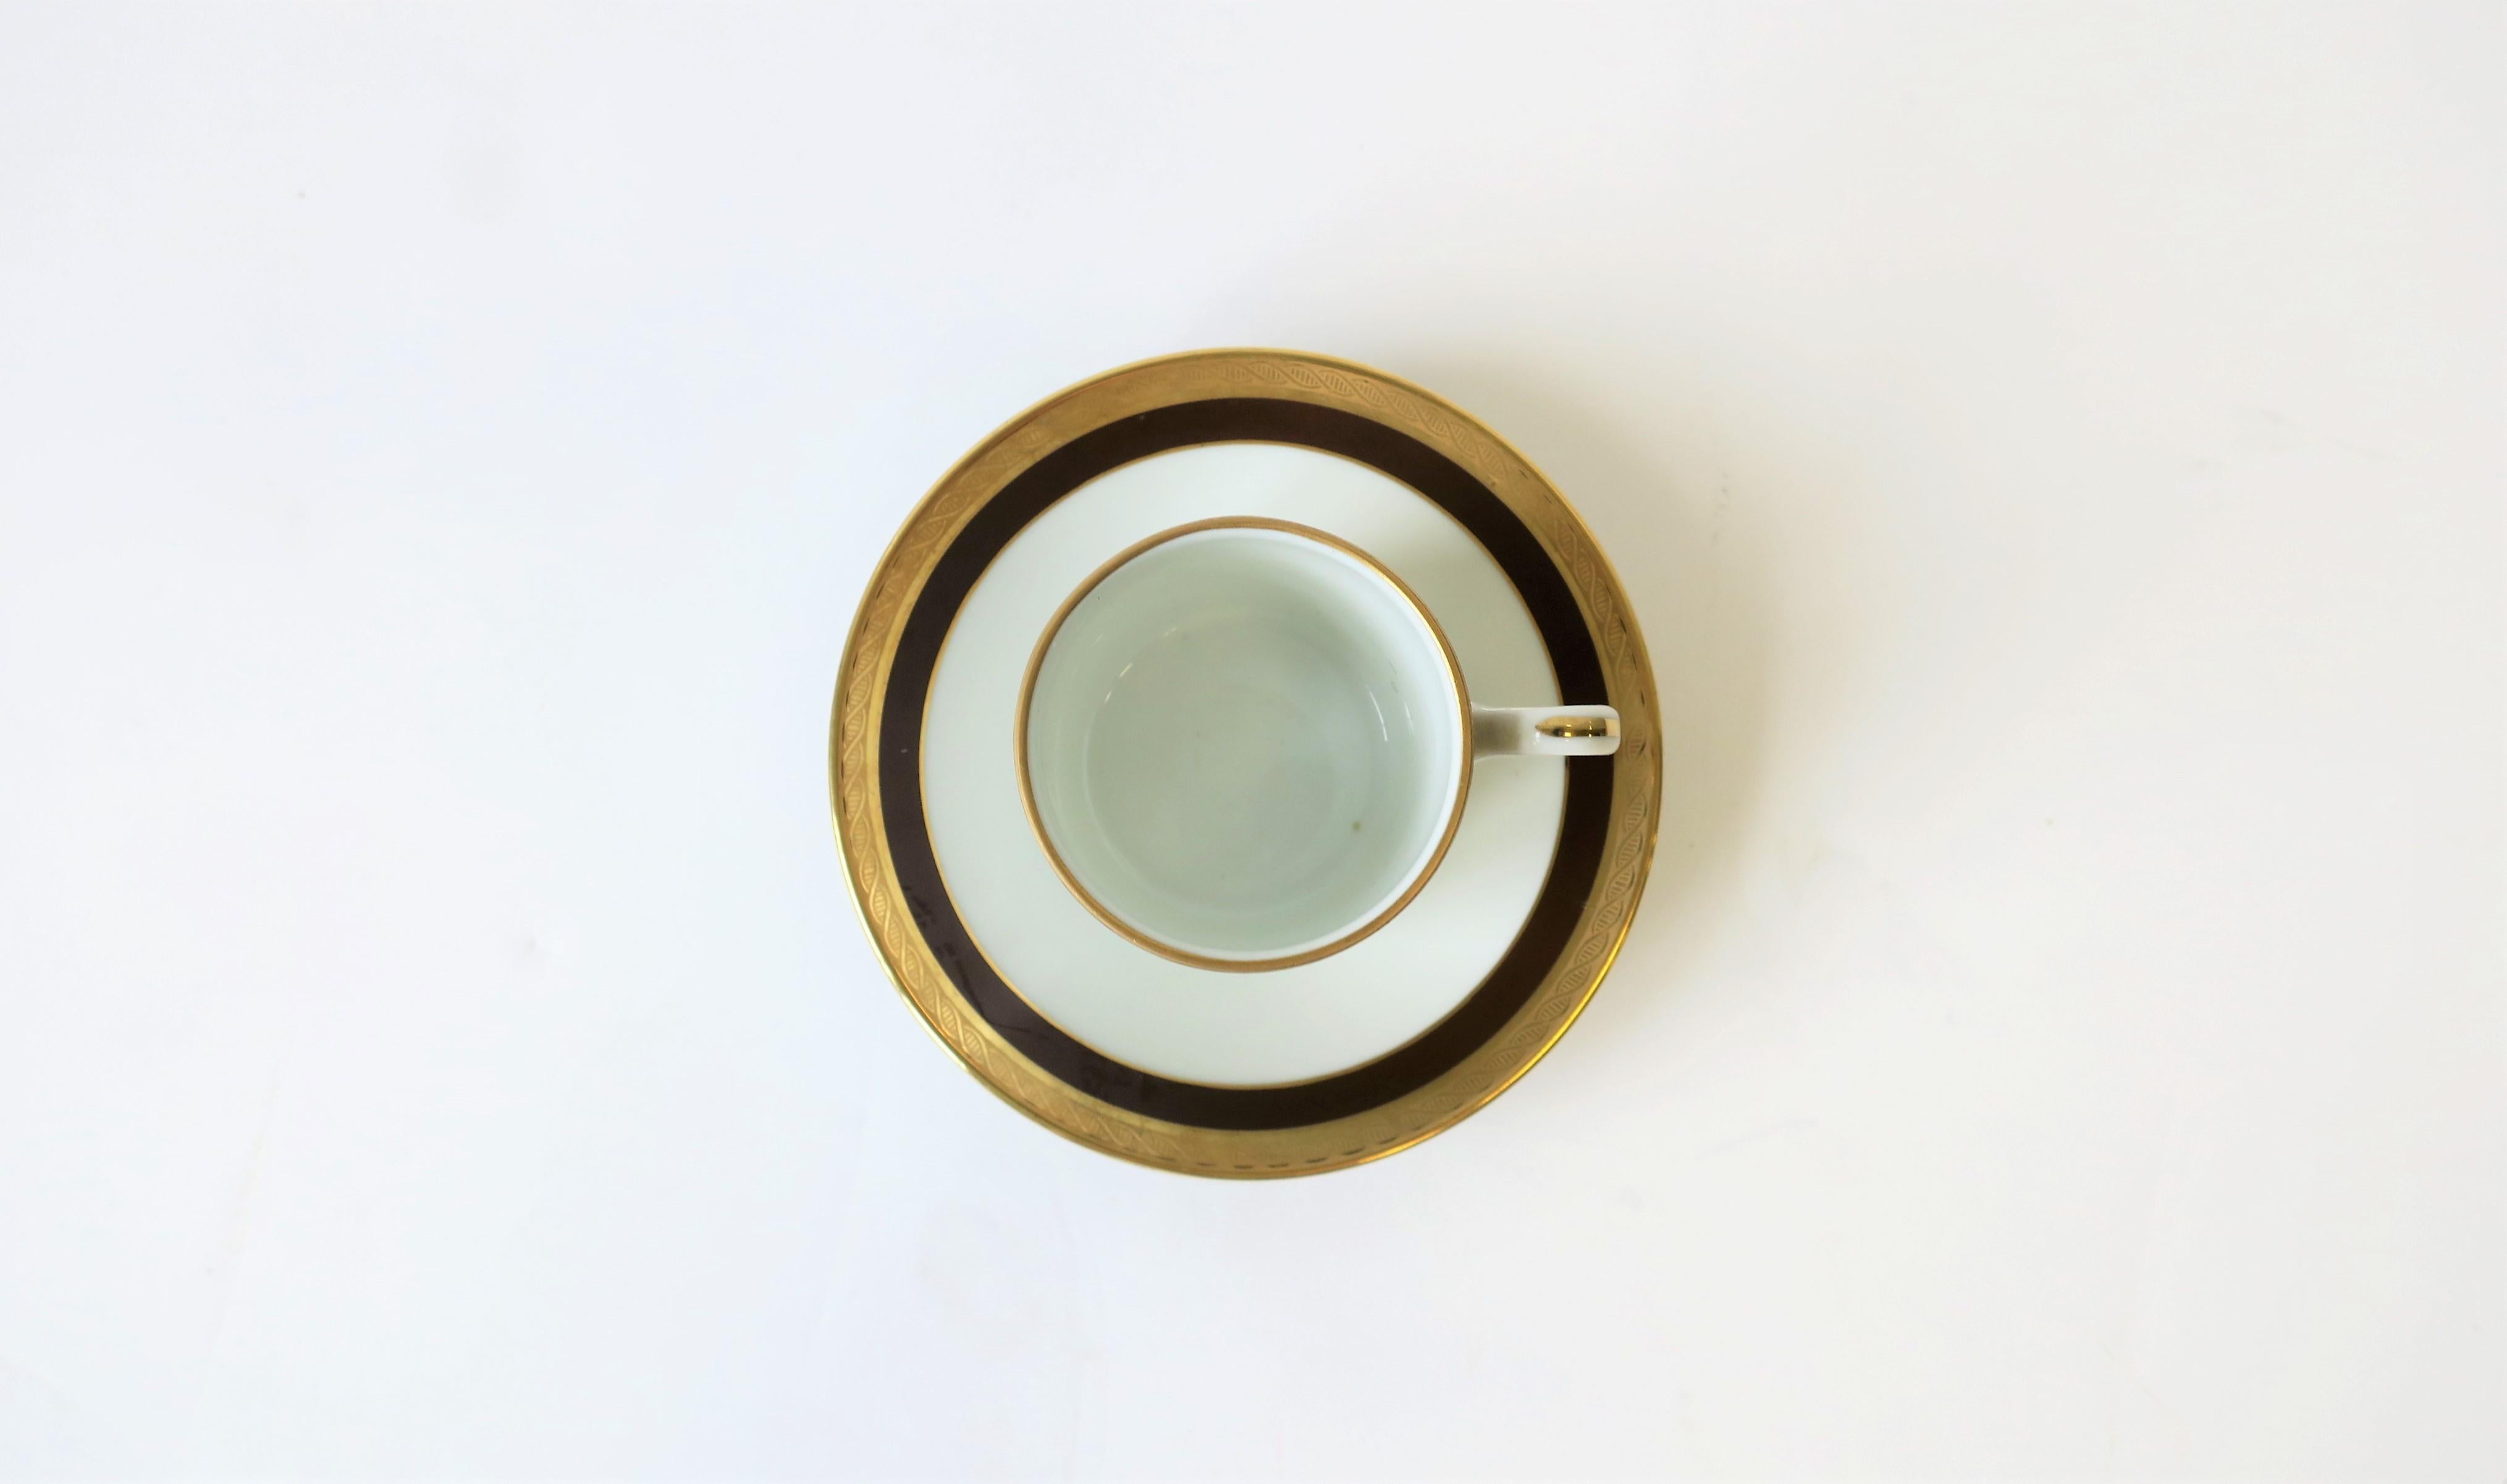 Glazed Designer White and Gold Italian Espresso Cup and Saucer by Richard Ginori